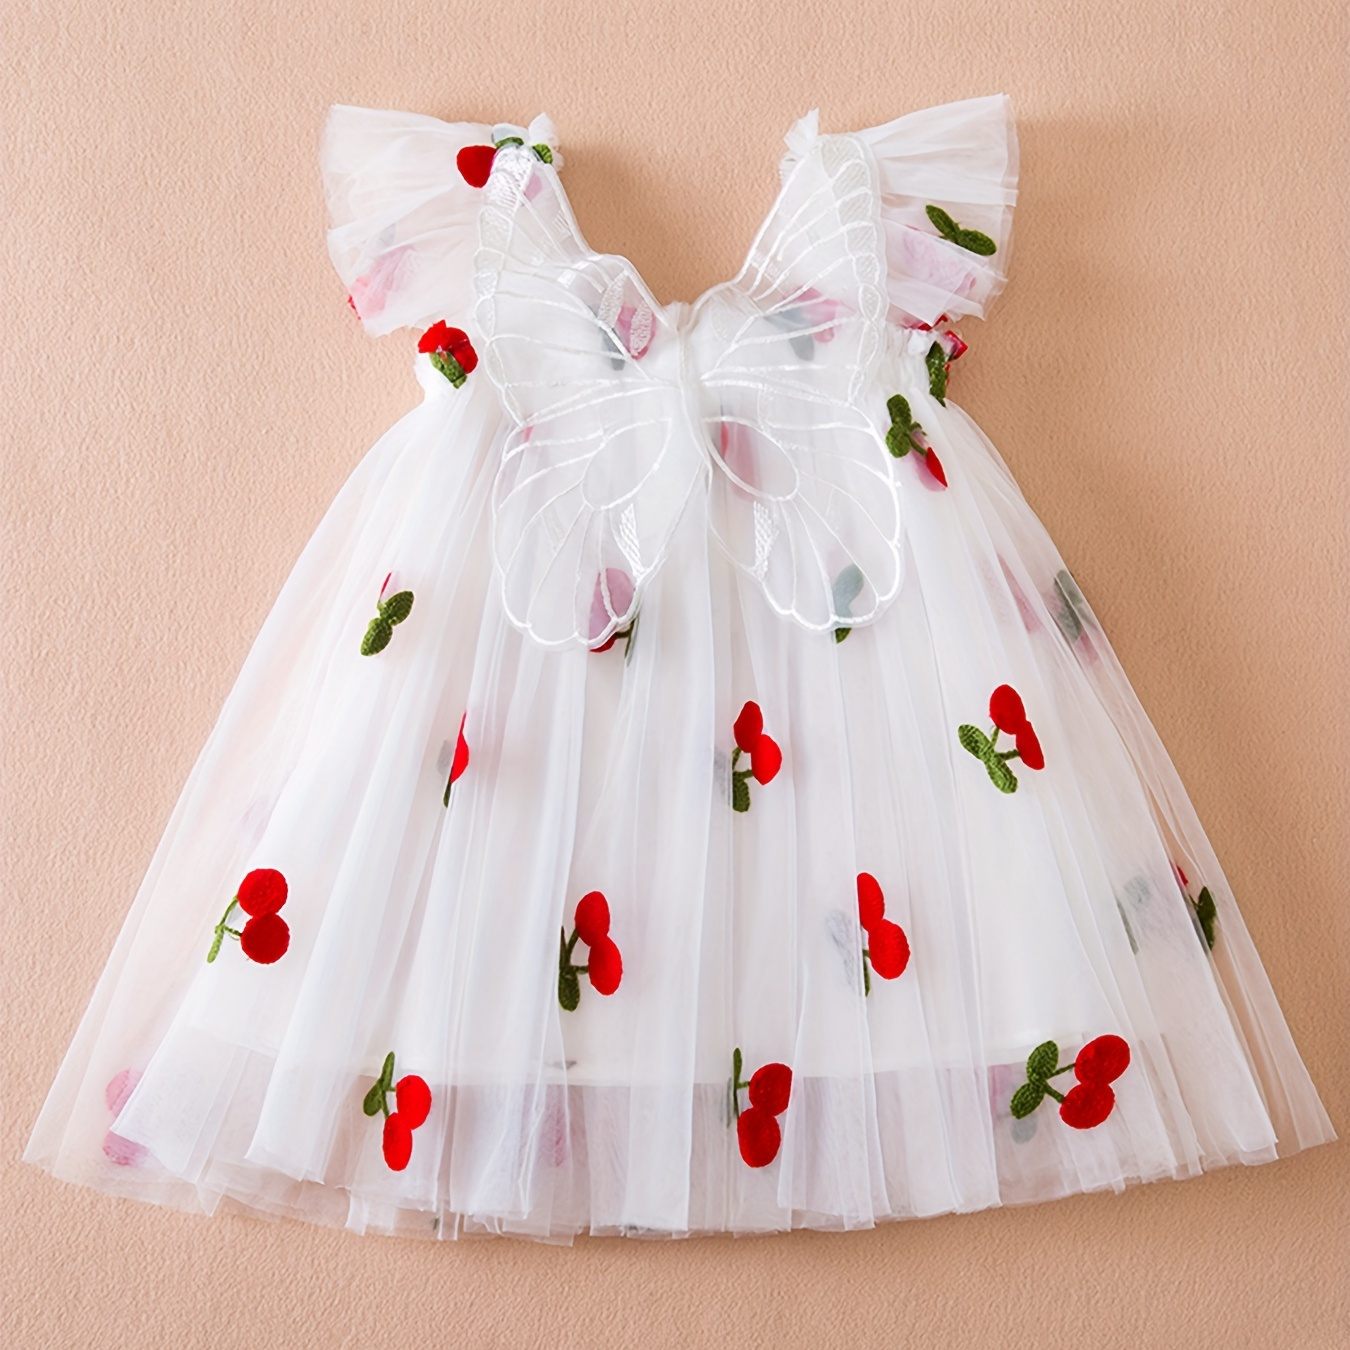 

Baby's Butterfly Applique Tulle Dress, Cherry Embroidered Sleeveless Princess Dress, Infant & Toddler Girl's Clothing For Summer/spring, As Gift